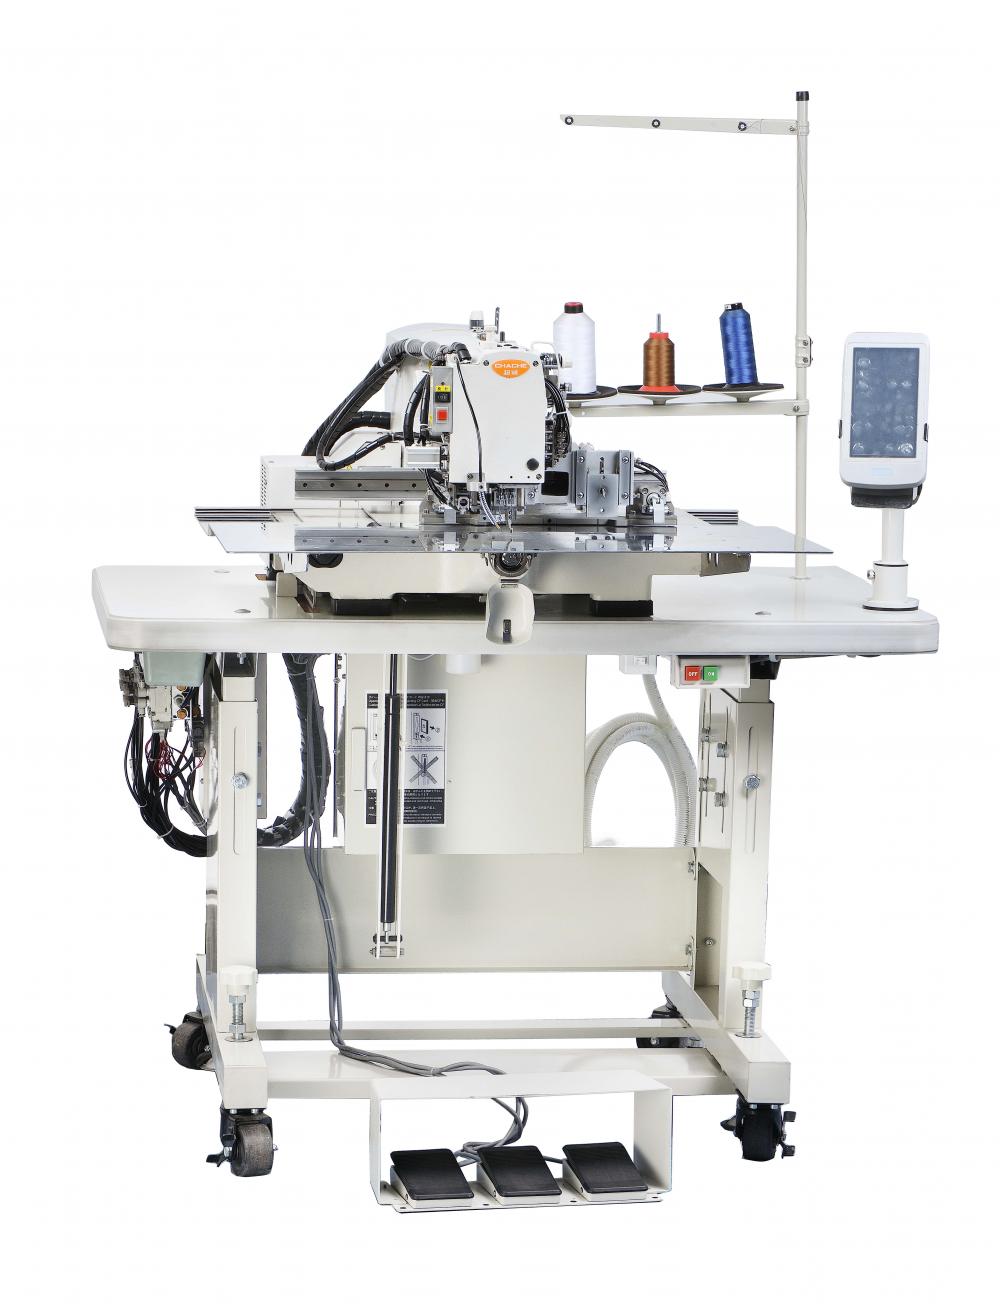 3 needle 3 colors thread automatic sewing machine